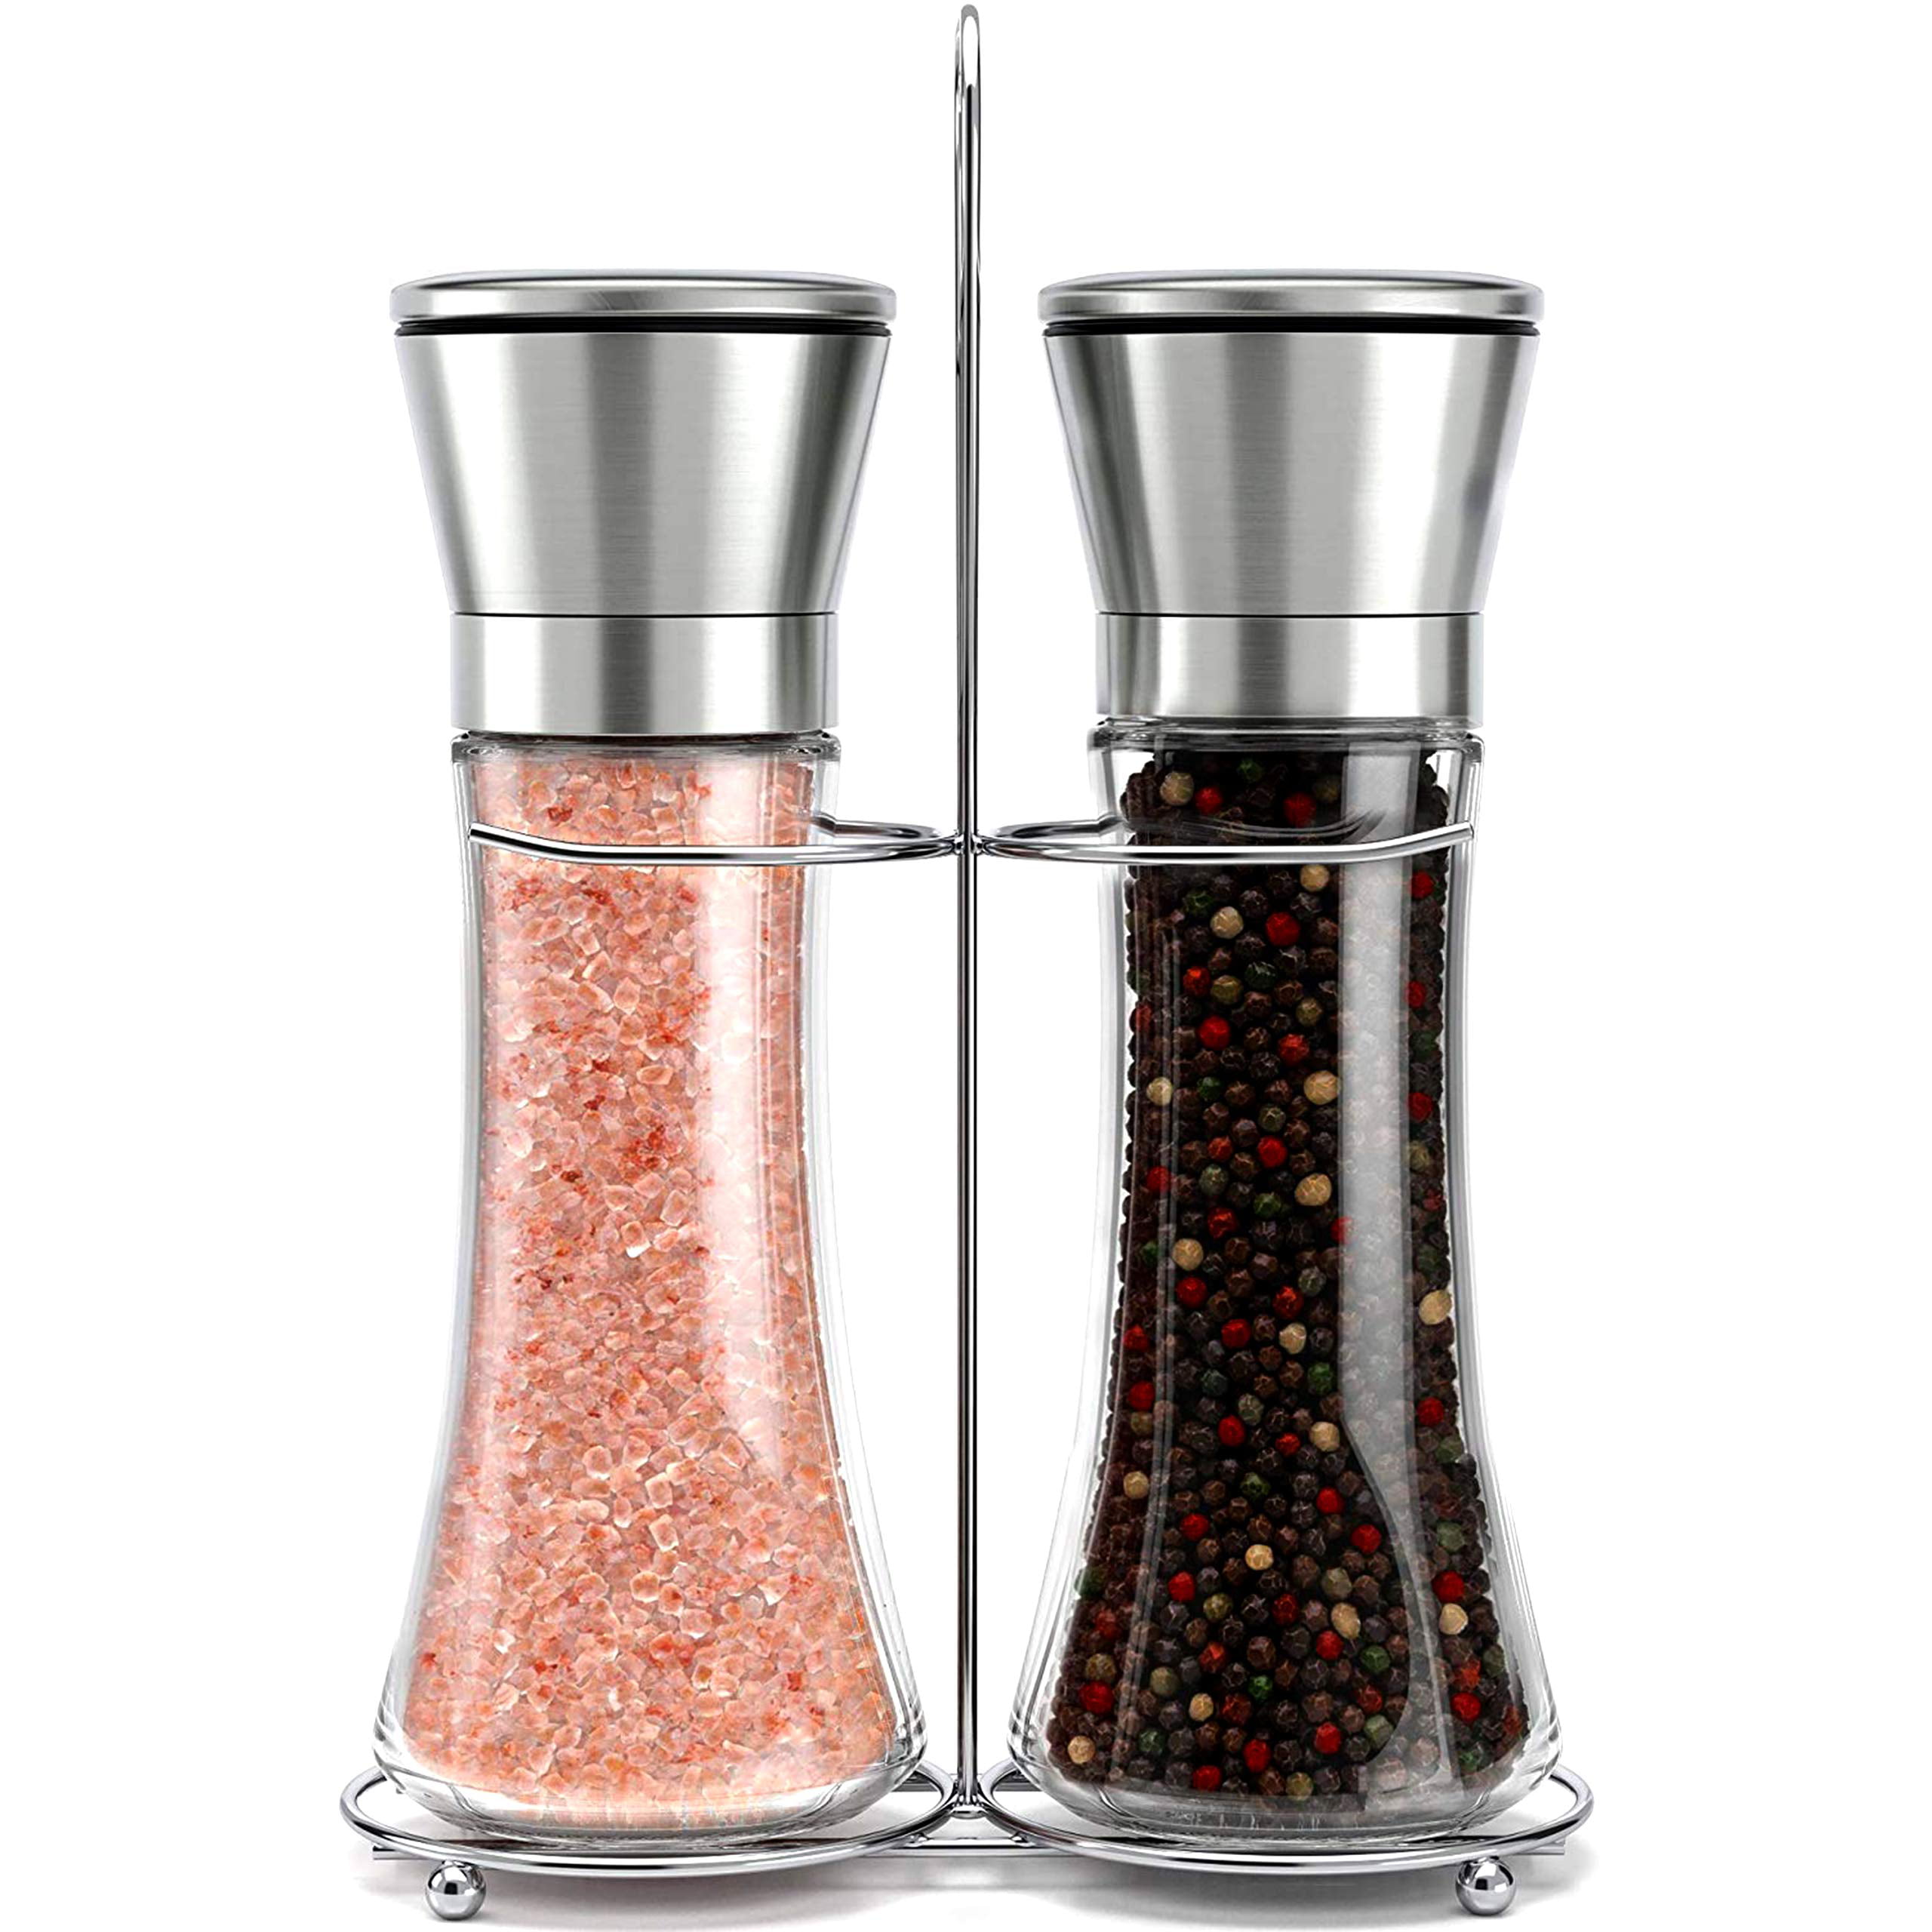 Salt and Pepper Mills Premium Set of Salt and Peppercorn Grinders with Adjustable Ceramic Coarseness Brushed Stainless Steel and Glass Body Shakers 